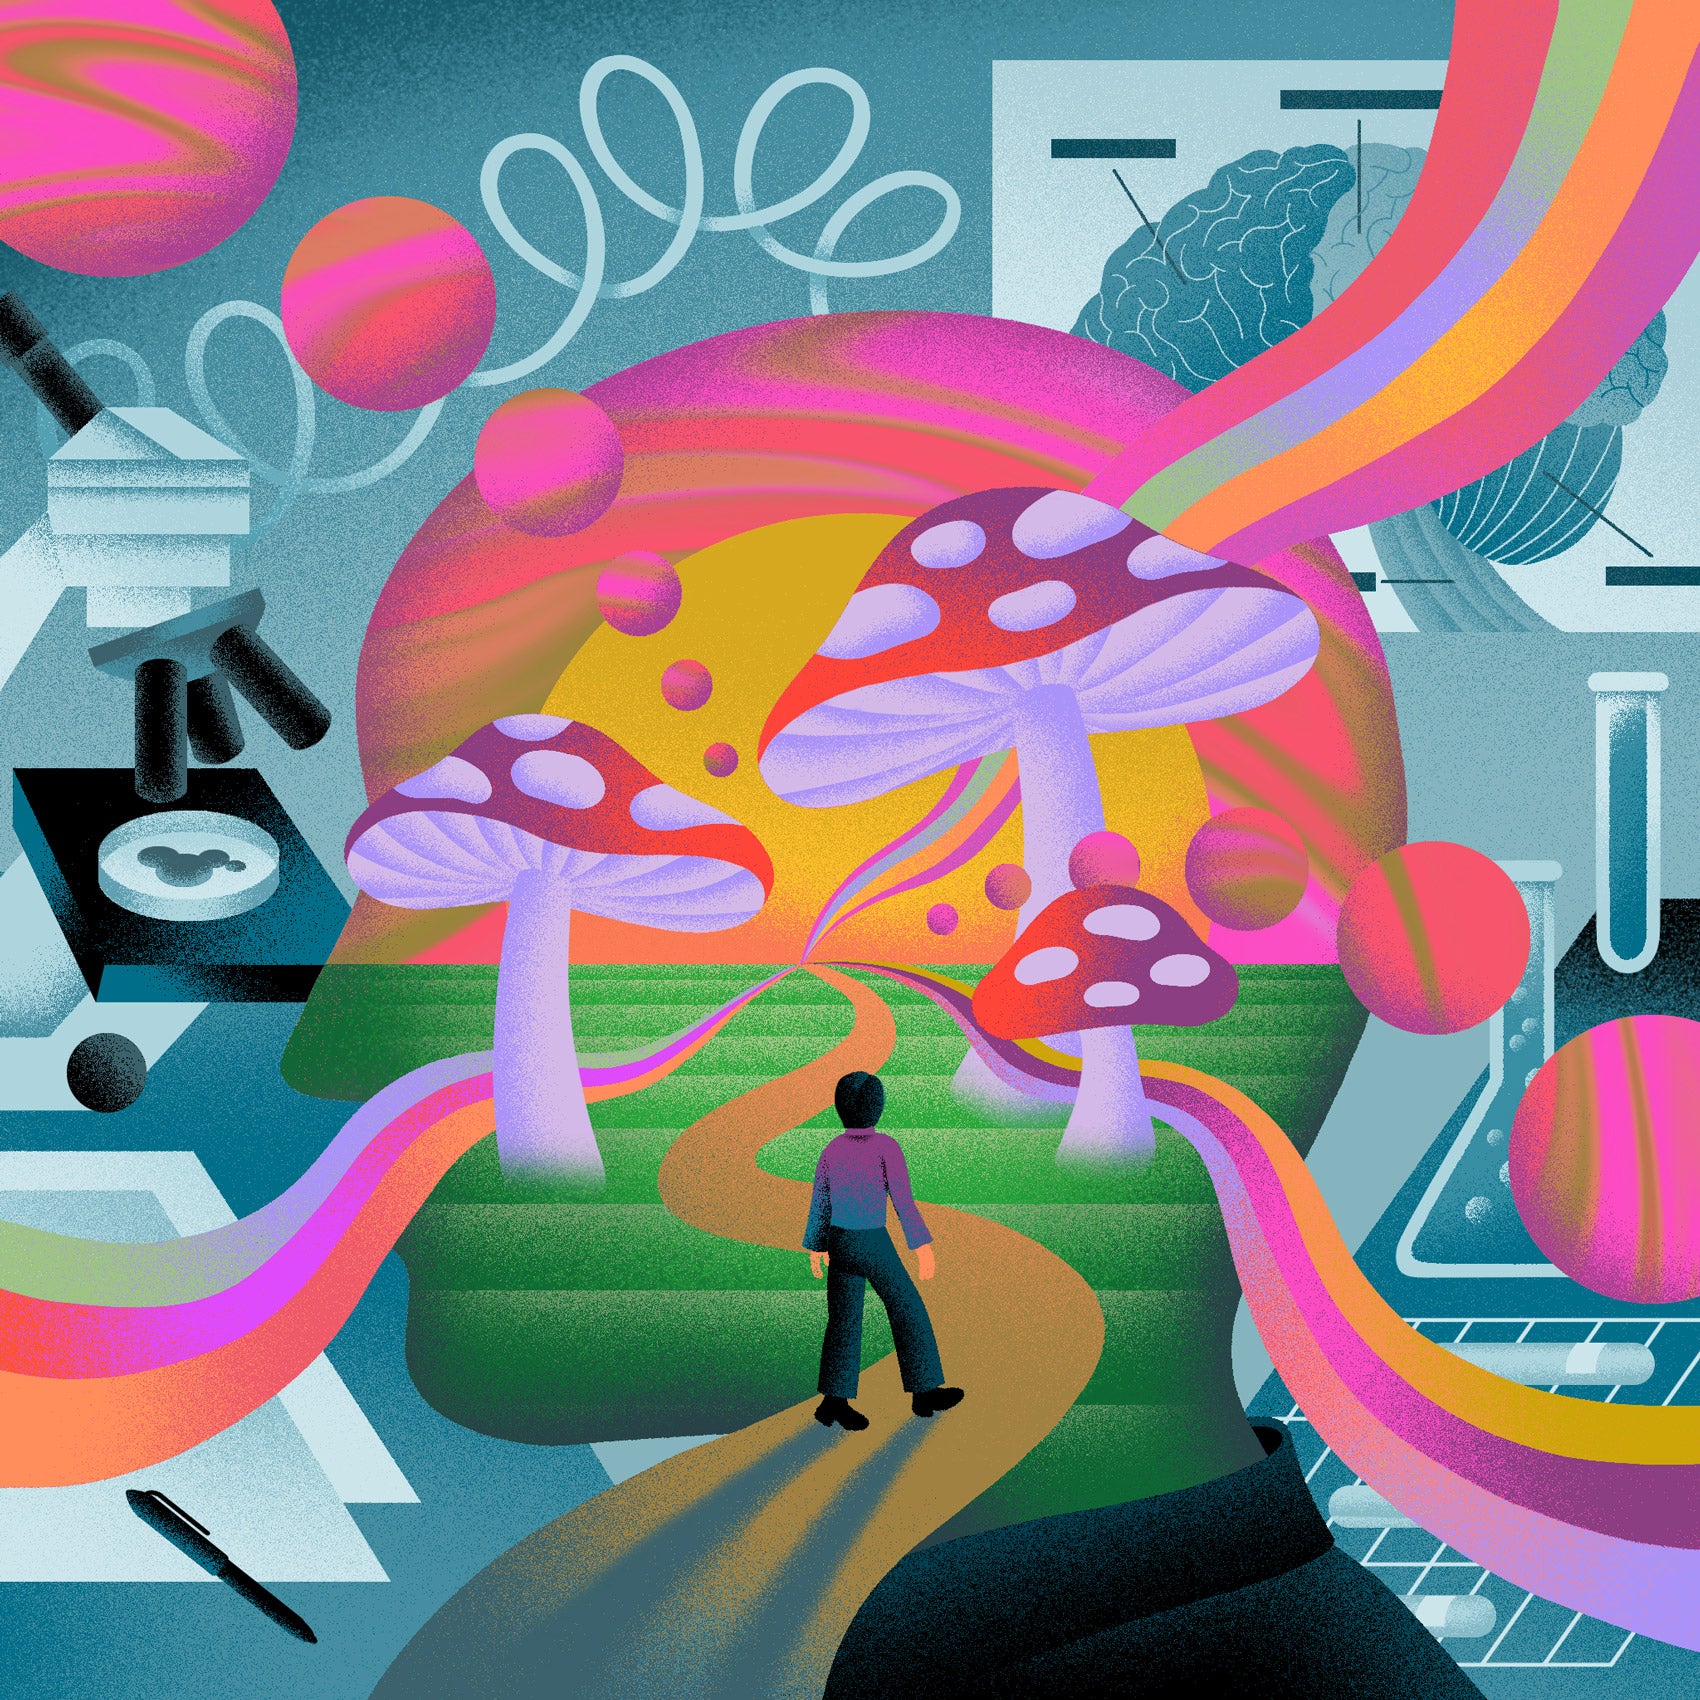 Colorful illustration featuring mushrooms a microscope and other scientific devices and a man walking along a path